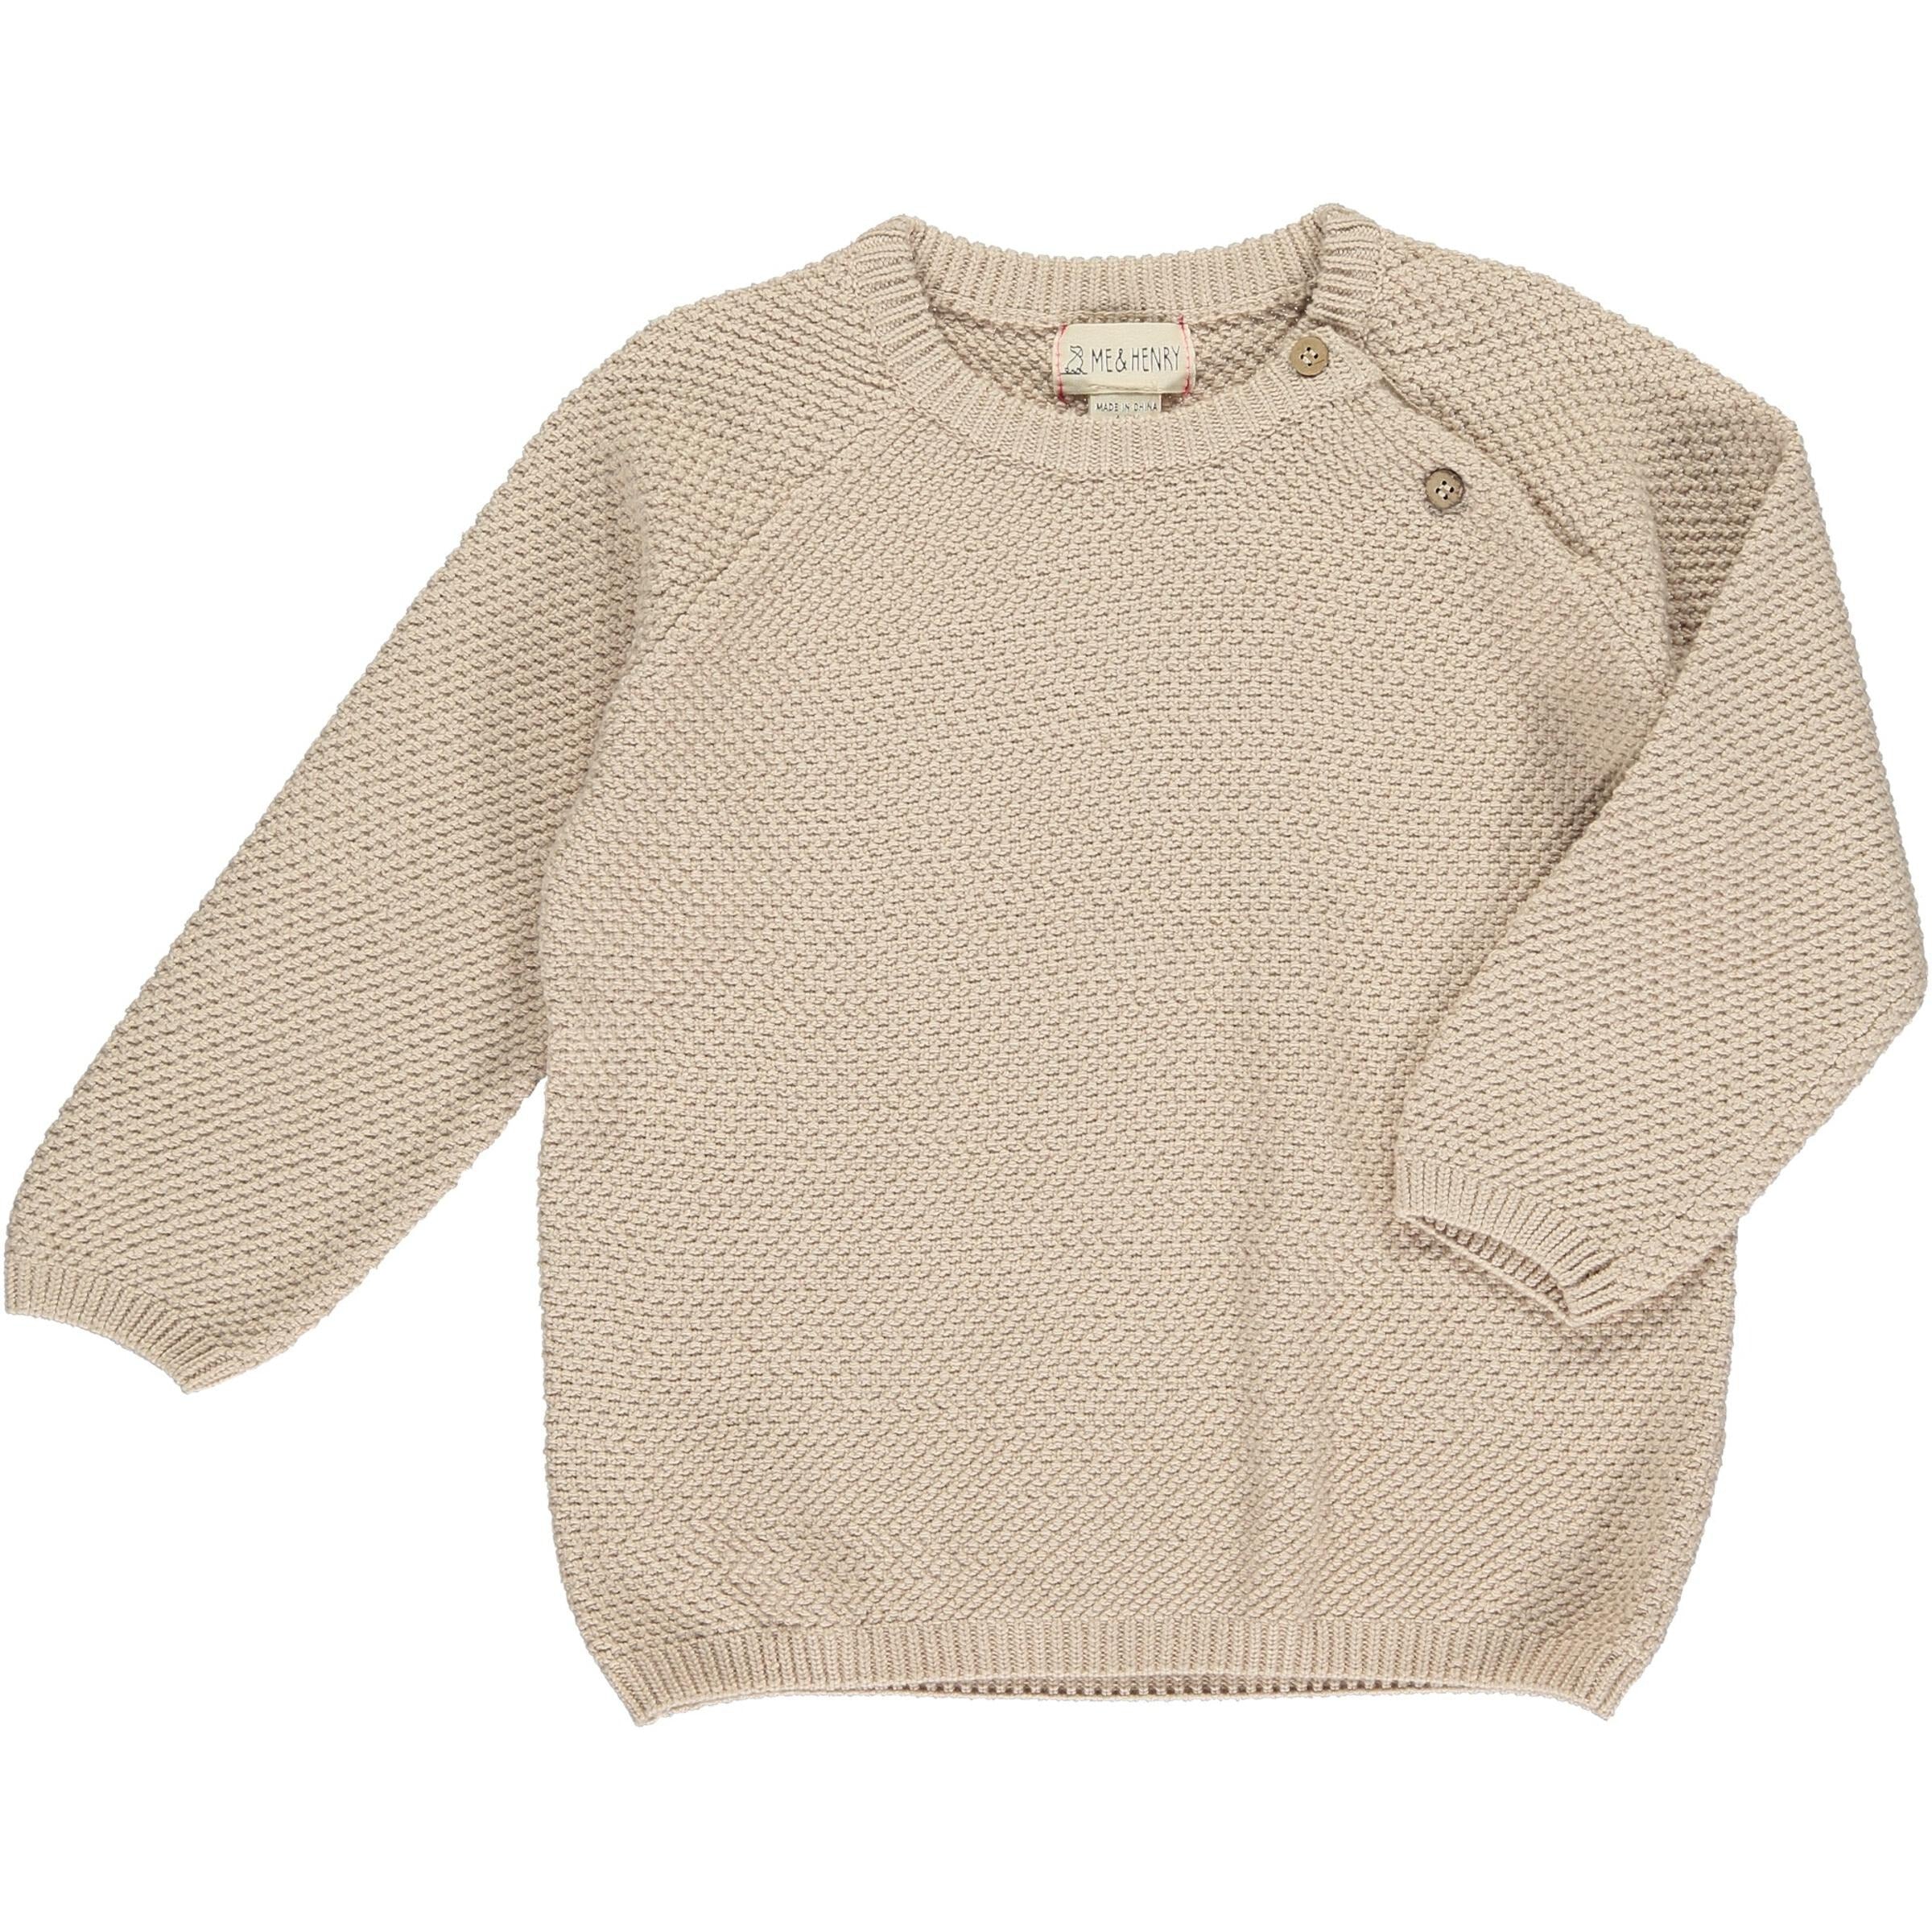 cream colored sweater with two button closure at the neck